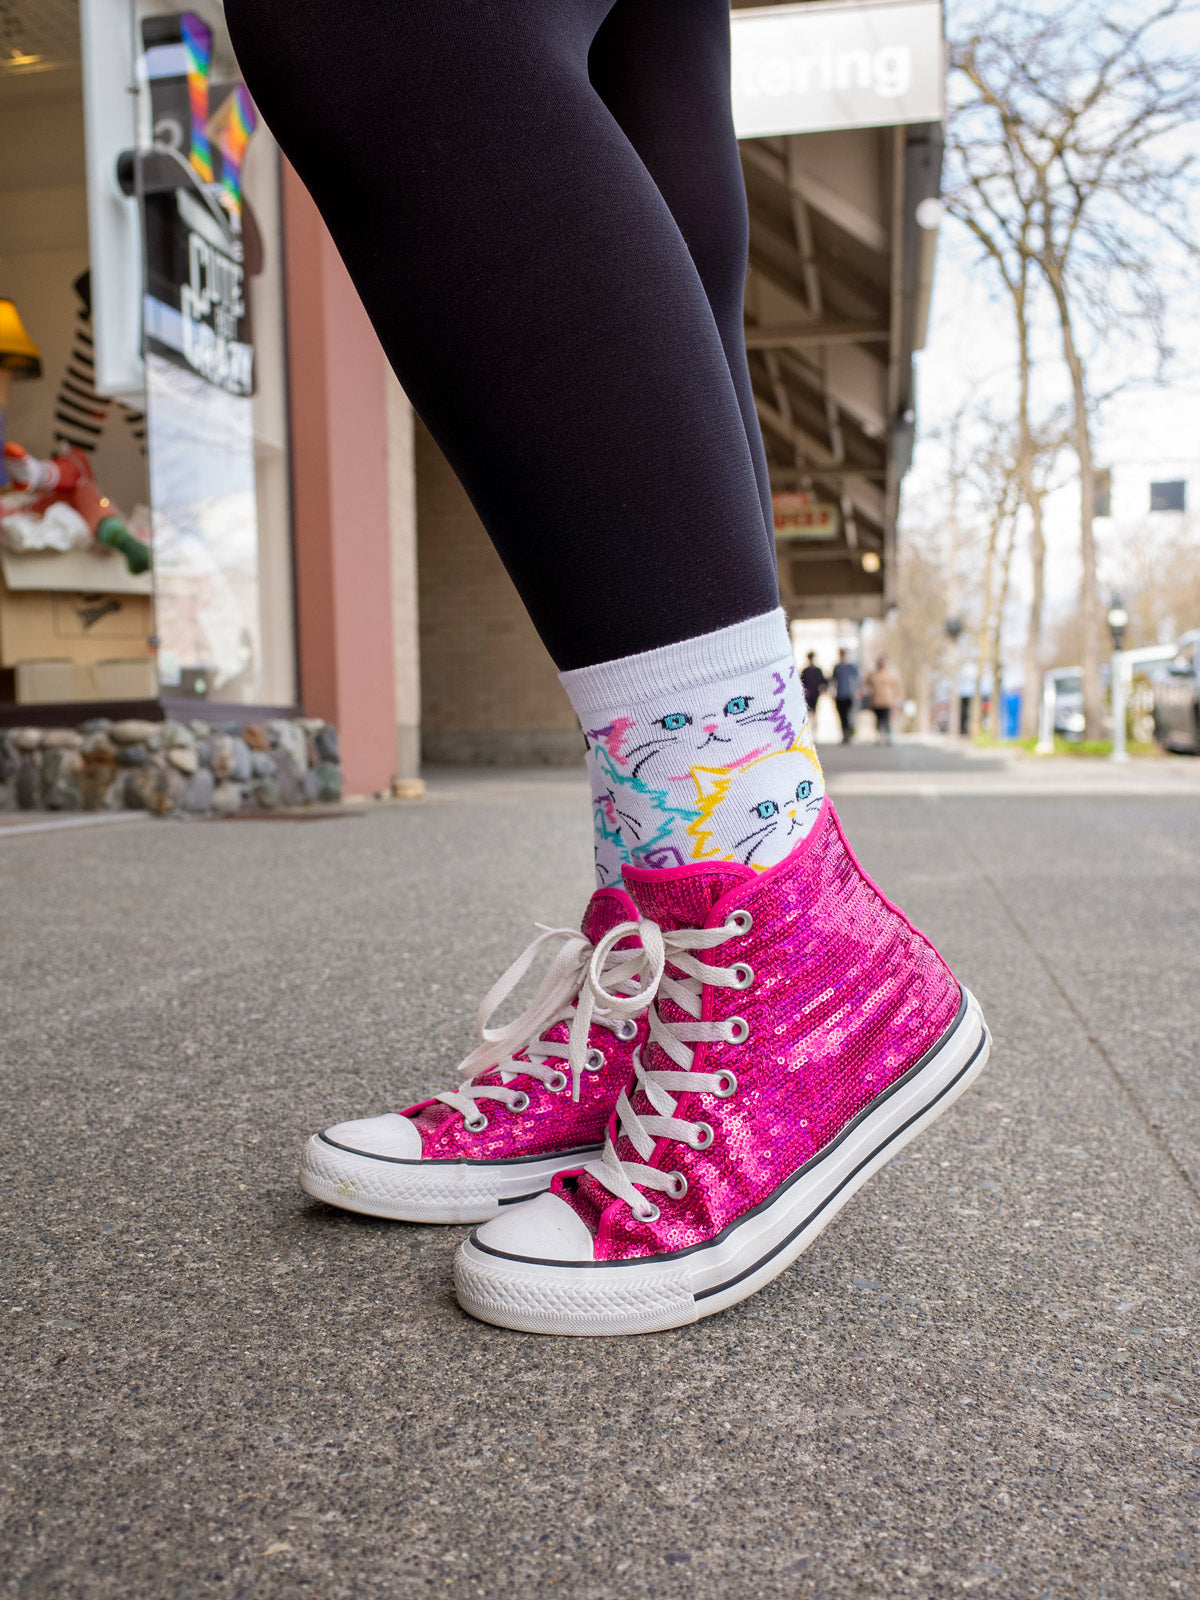 Cute cat socks are worn with magenta glitter Converse and black leggings